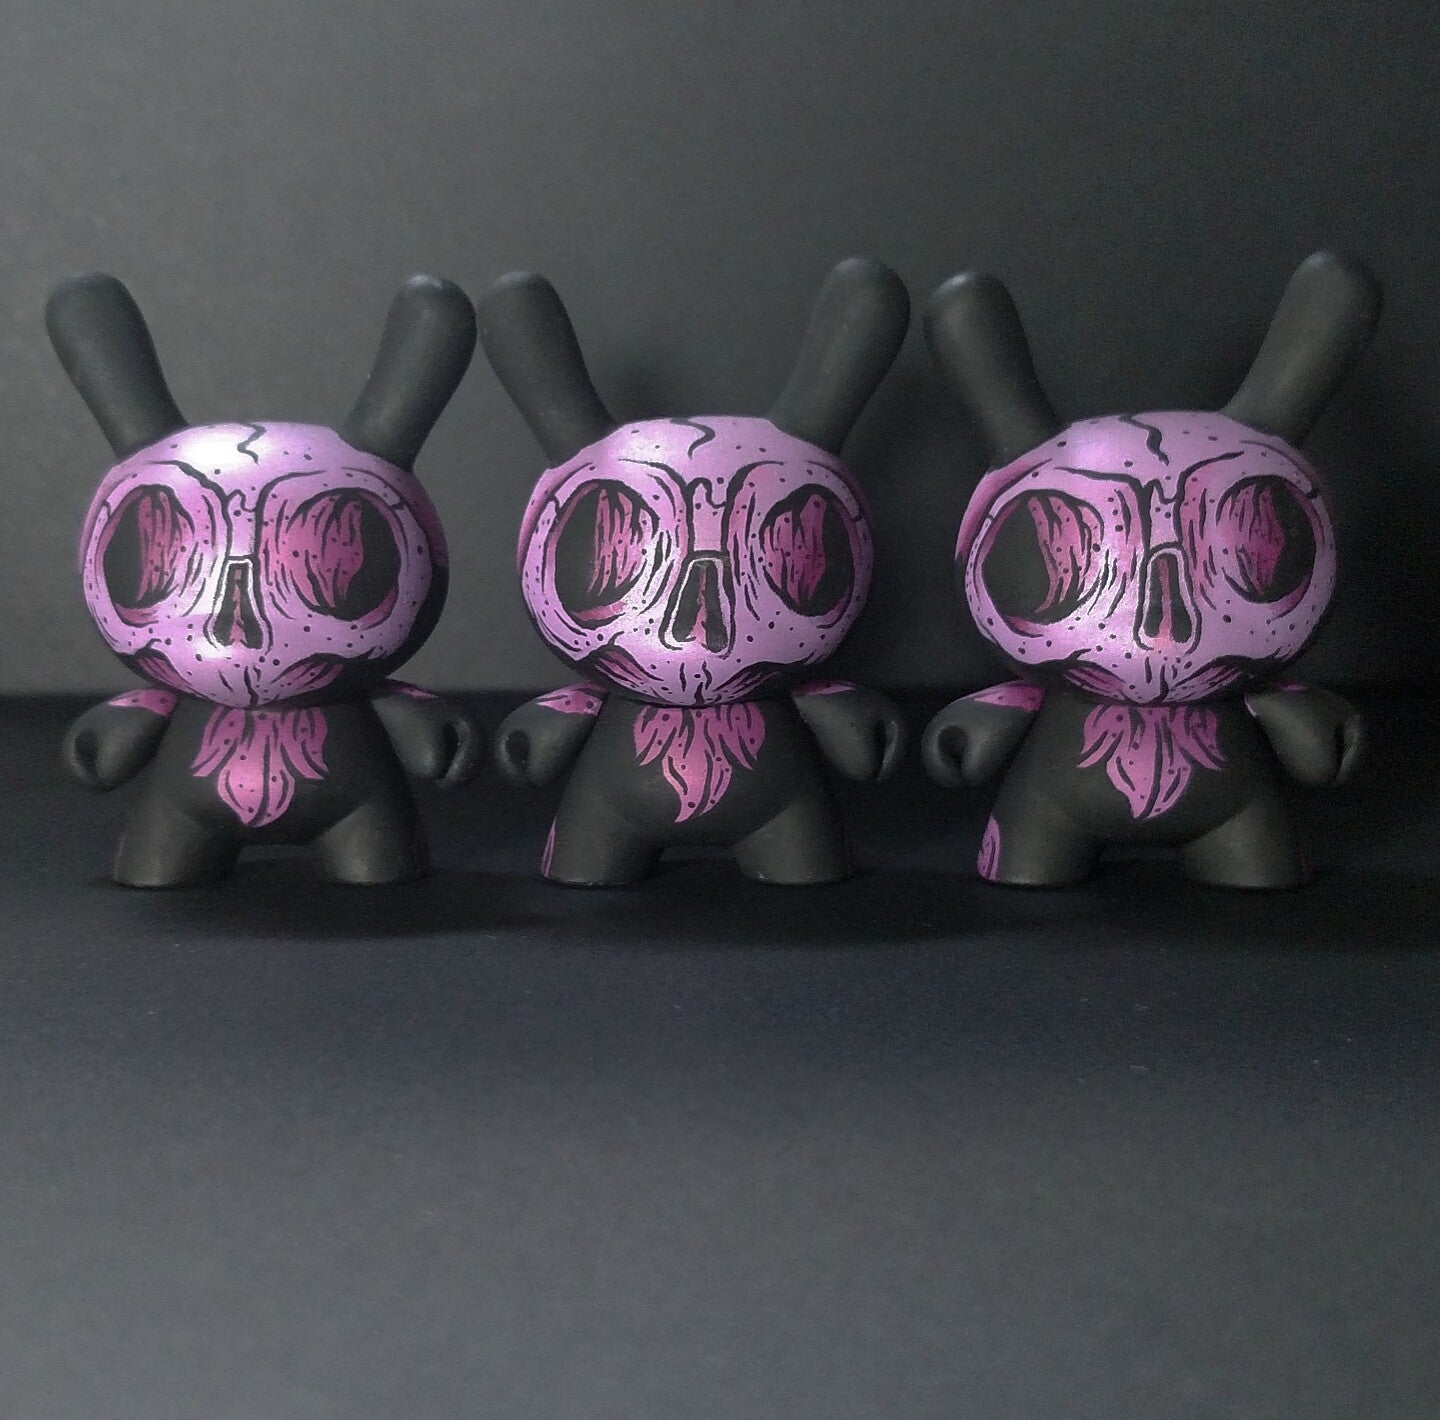 Group of small toys including a close-up of a skull and microphone, exclusive Atomic Fiend Dunnys by Cat Atomic.